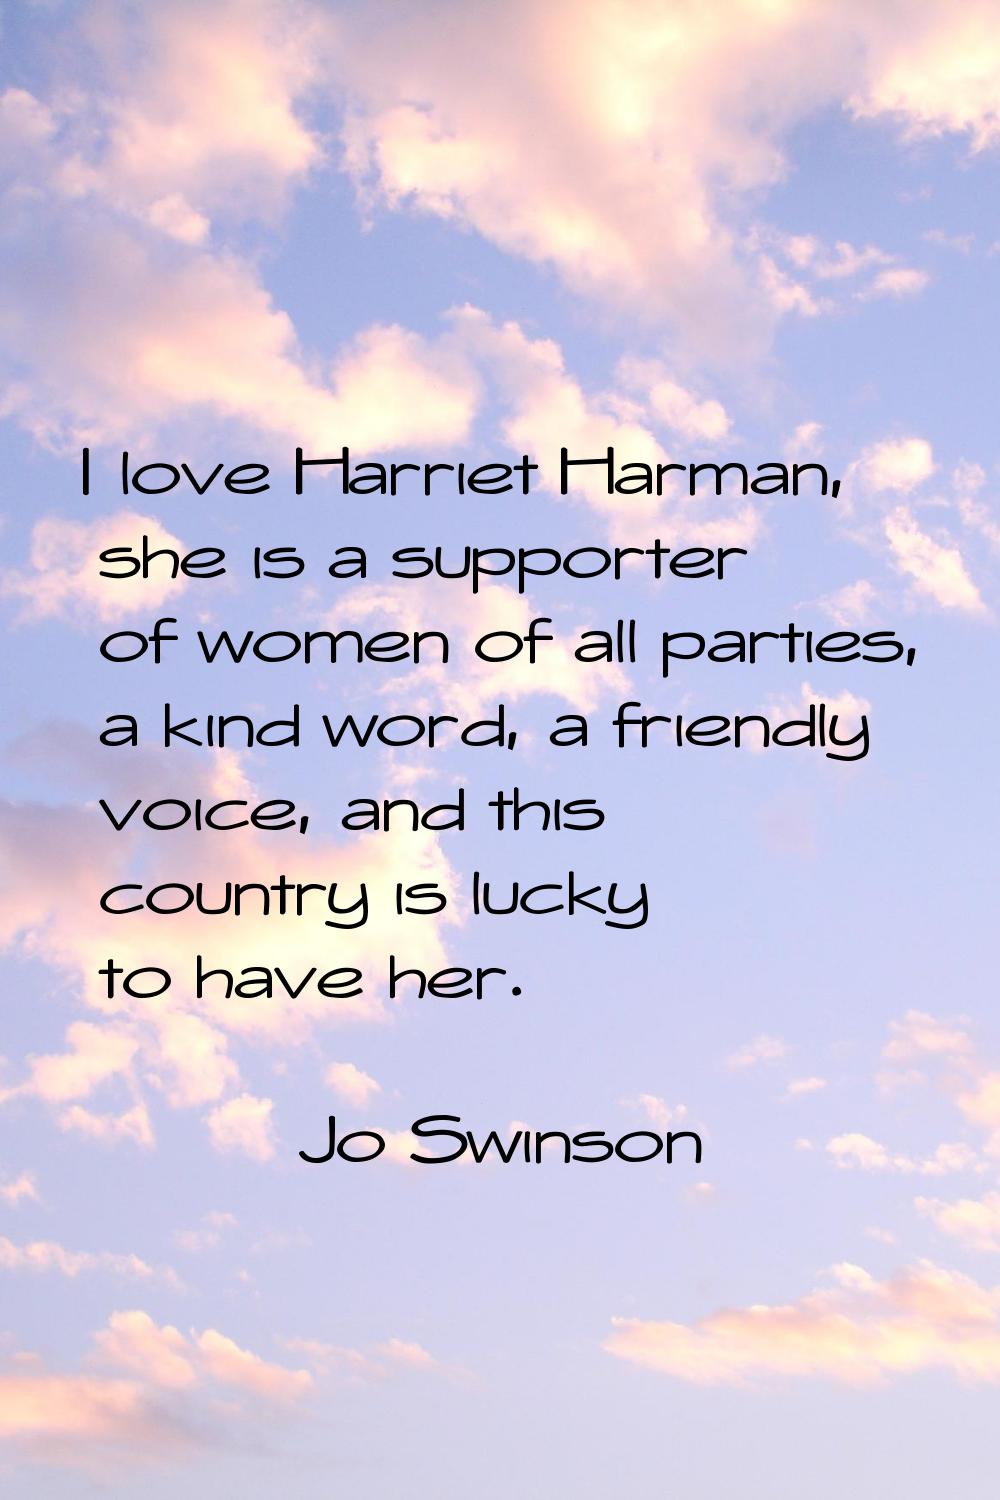 I love Harriet Harman, she is a supporter of women of all parties, a kind word, a friendly voice, a